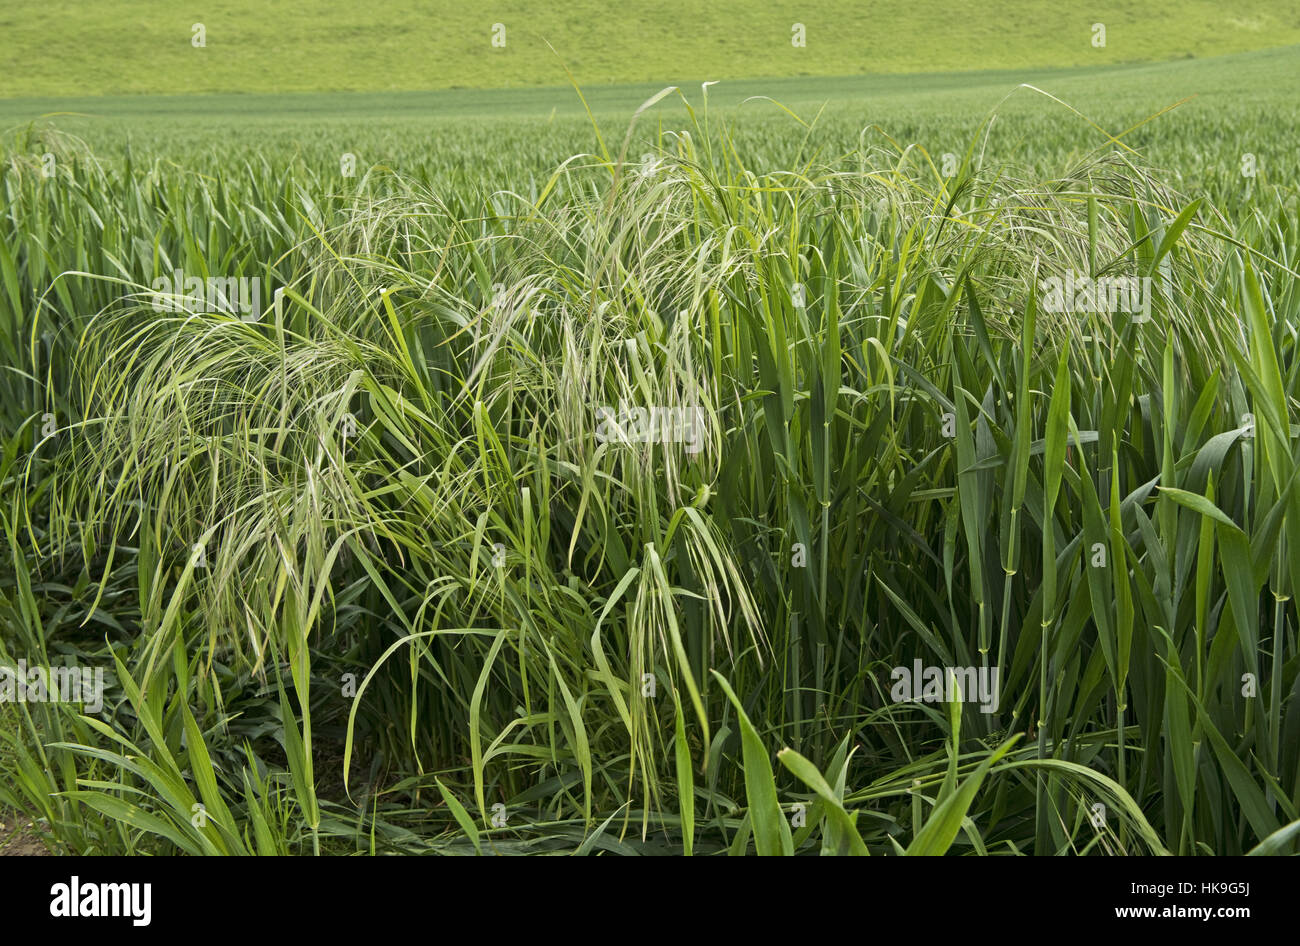 Sterile or barren brome, Bromus sterilis, flower spikes of  grass weeds in a winter wheat crop, May Stock Photo